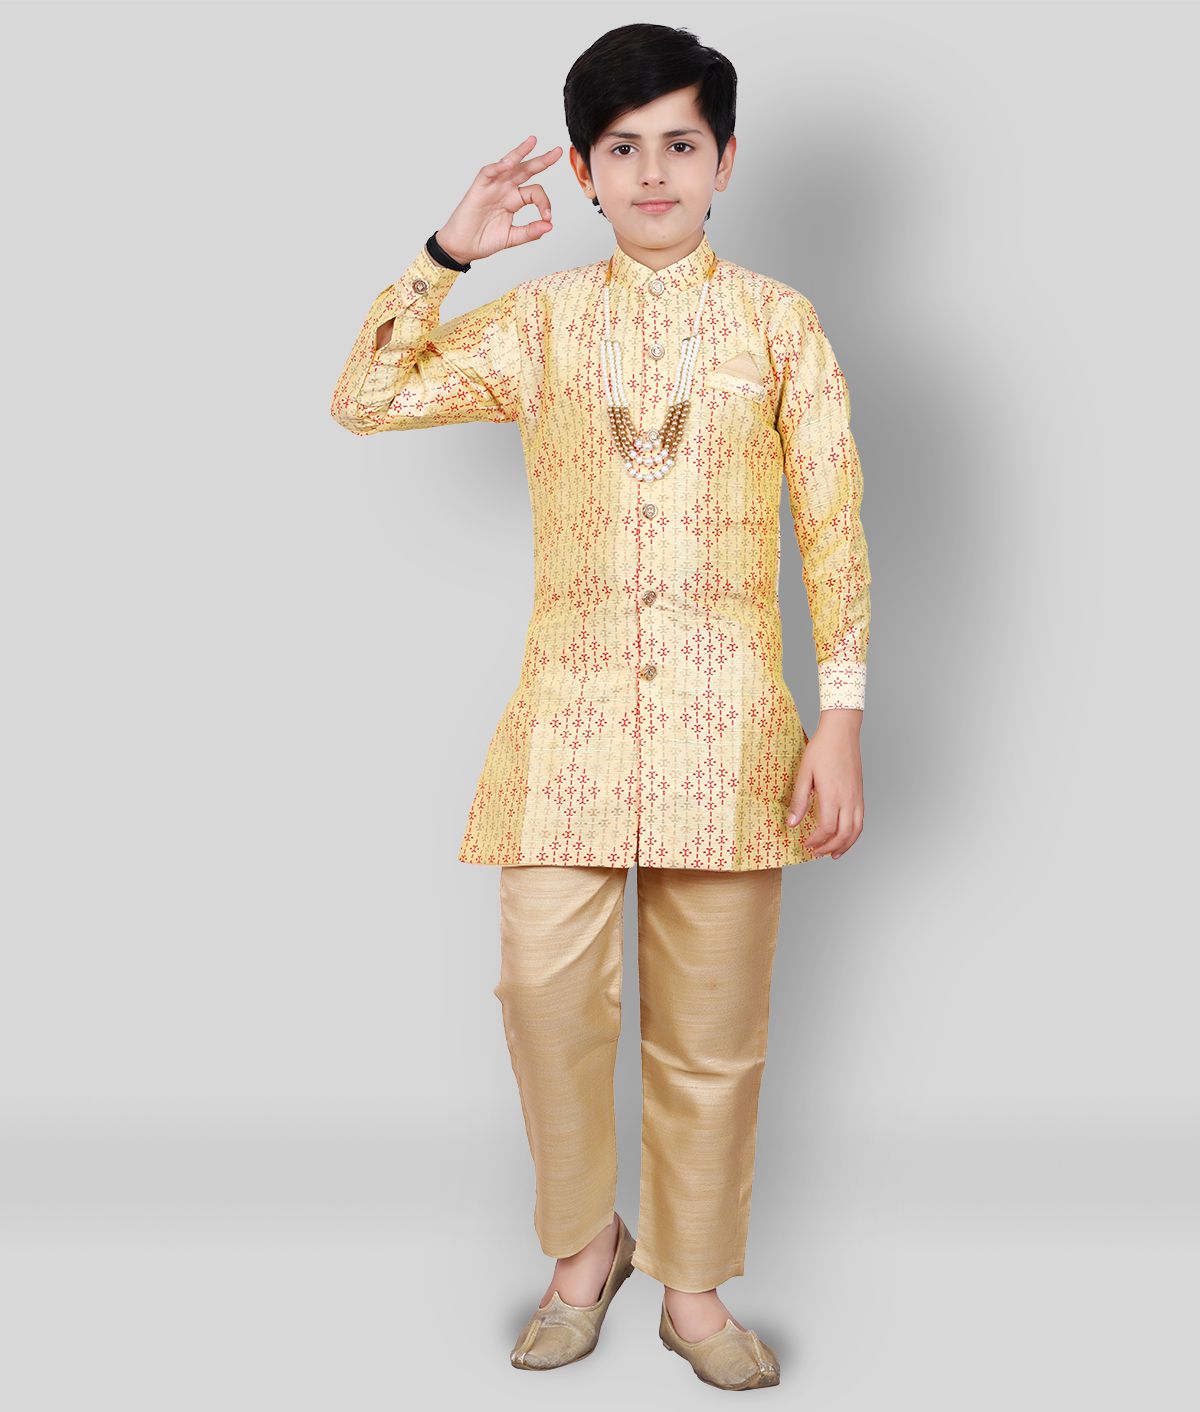     			Fourfolds Ethnic Wear Front Open Kurta With Trousers Style Pyjama for Kids and Boys